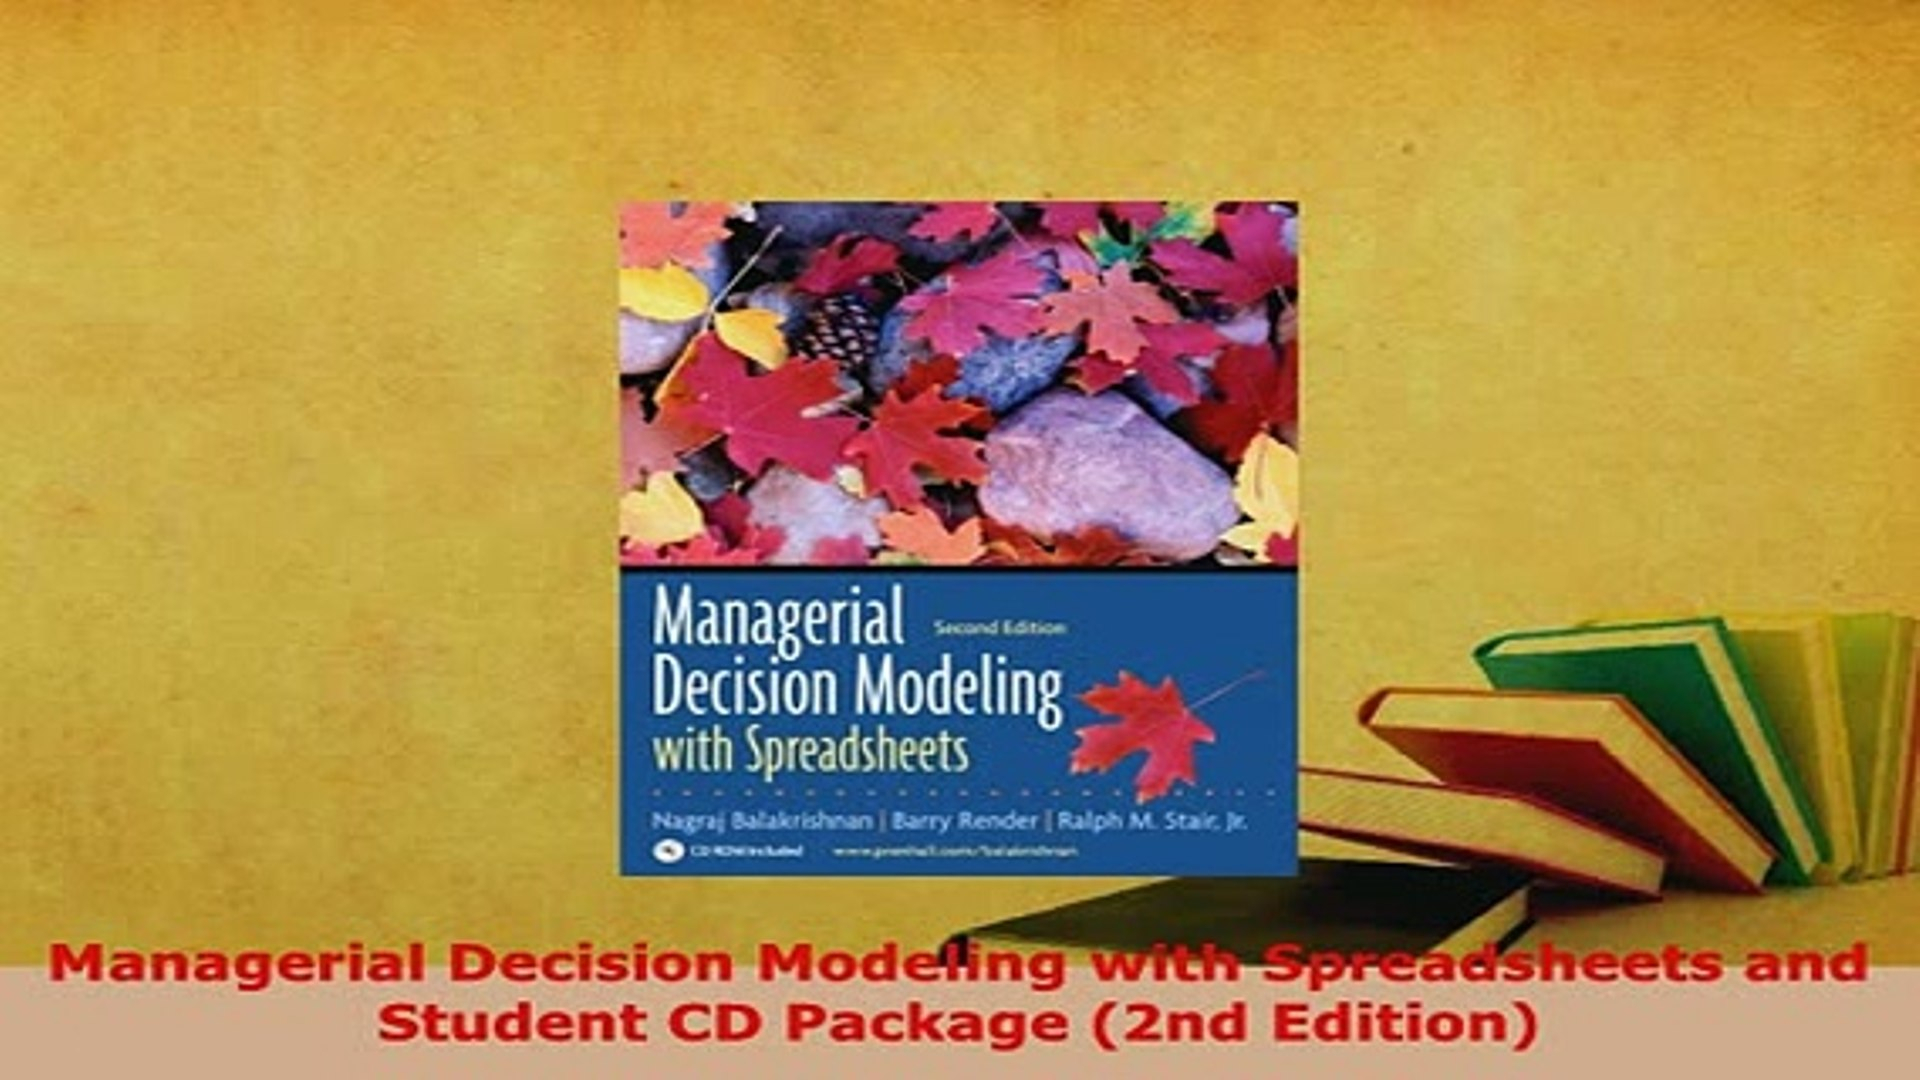 Managerial Decision Modeling With Spreadsheets 2Nd Edition In Download Managerial Decision Modeling With Spreadsheets And Student